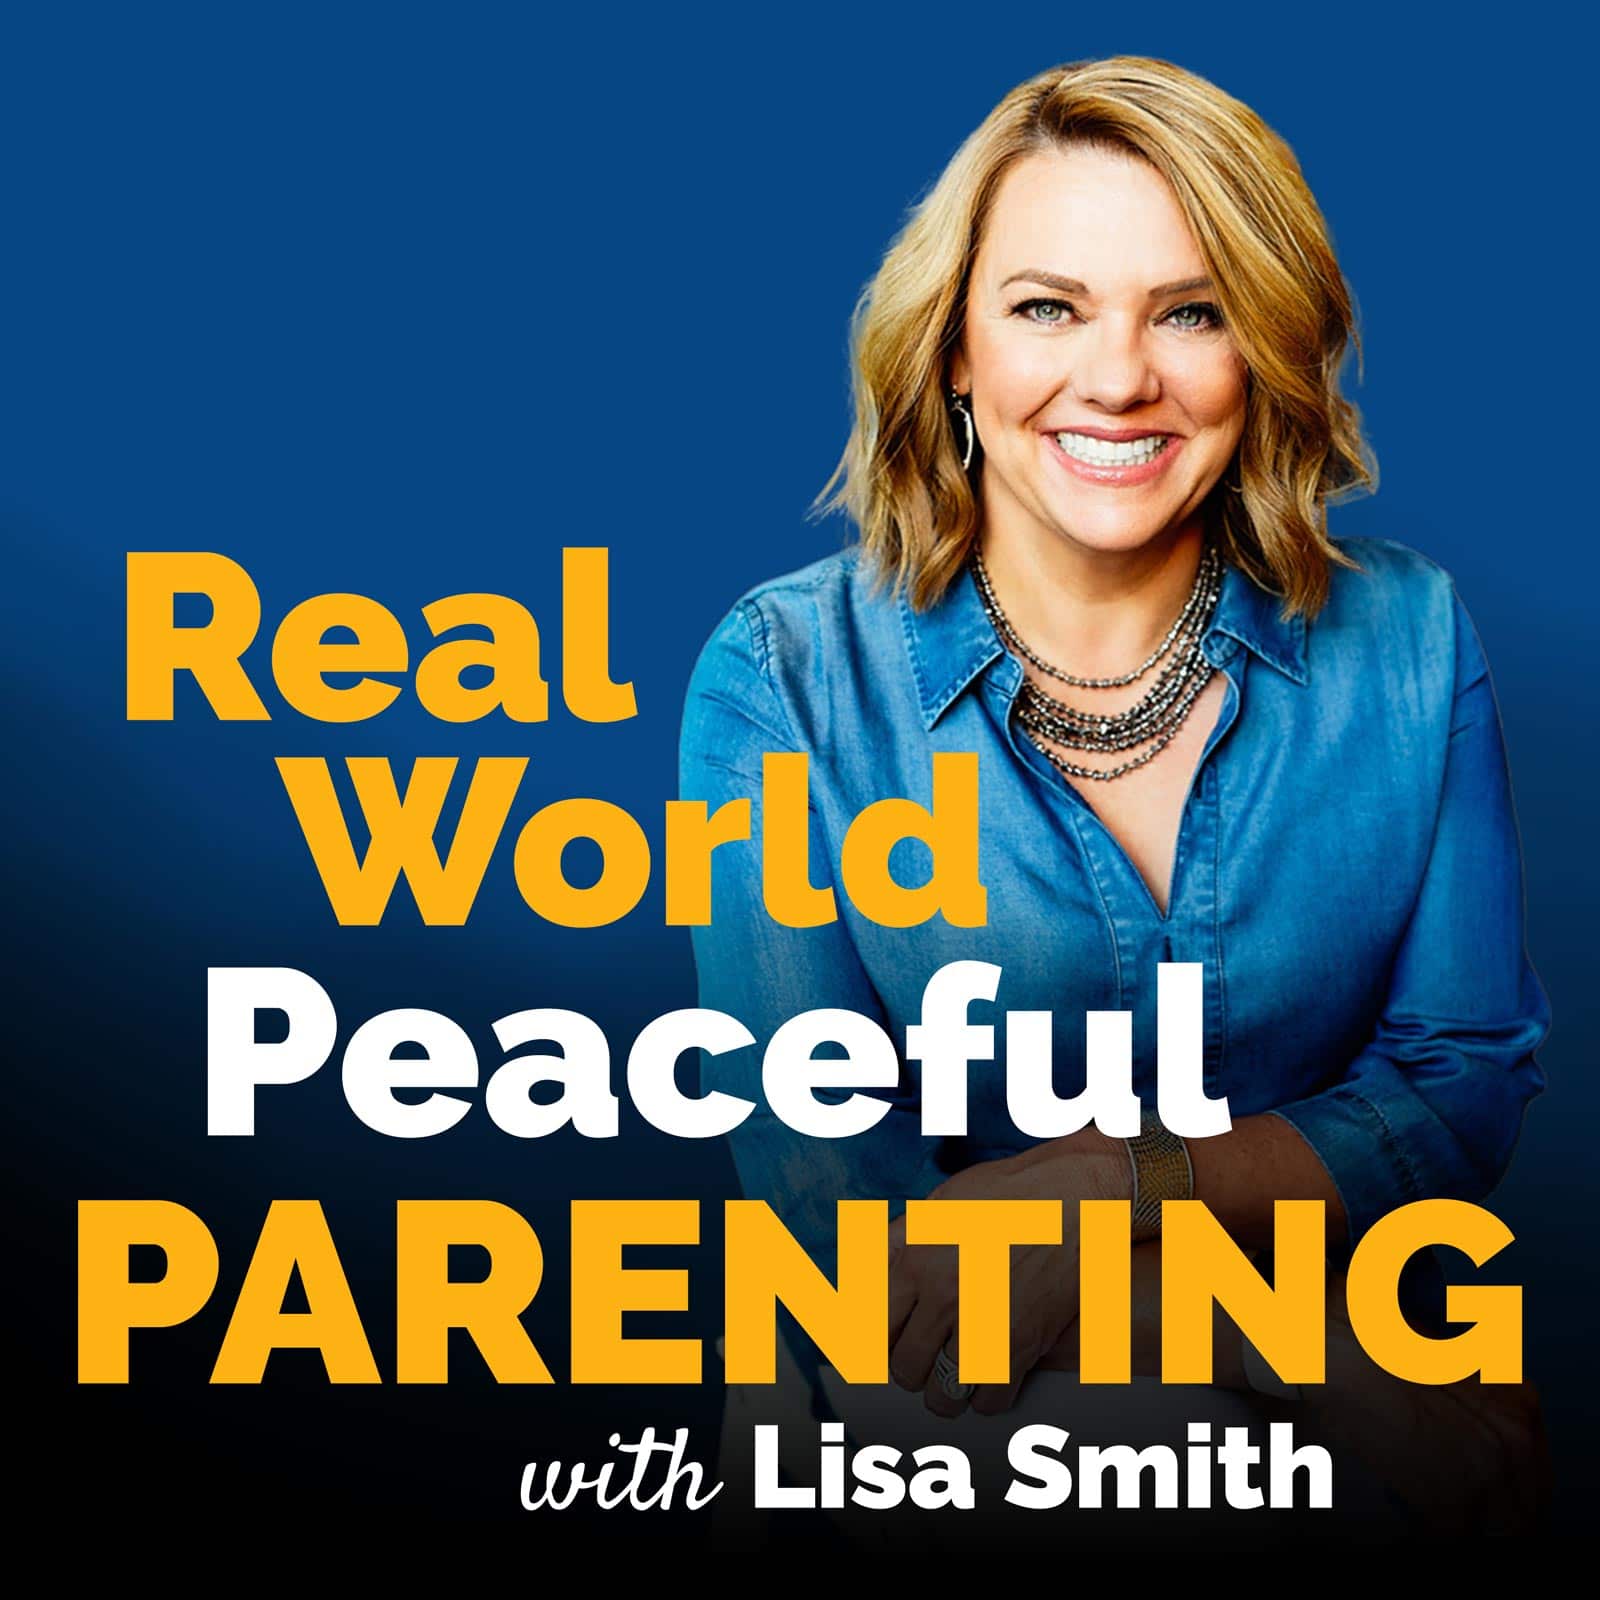 Introducing the Real World Peaceful Parenting